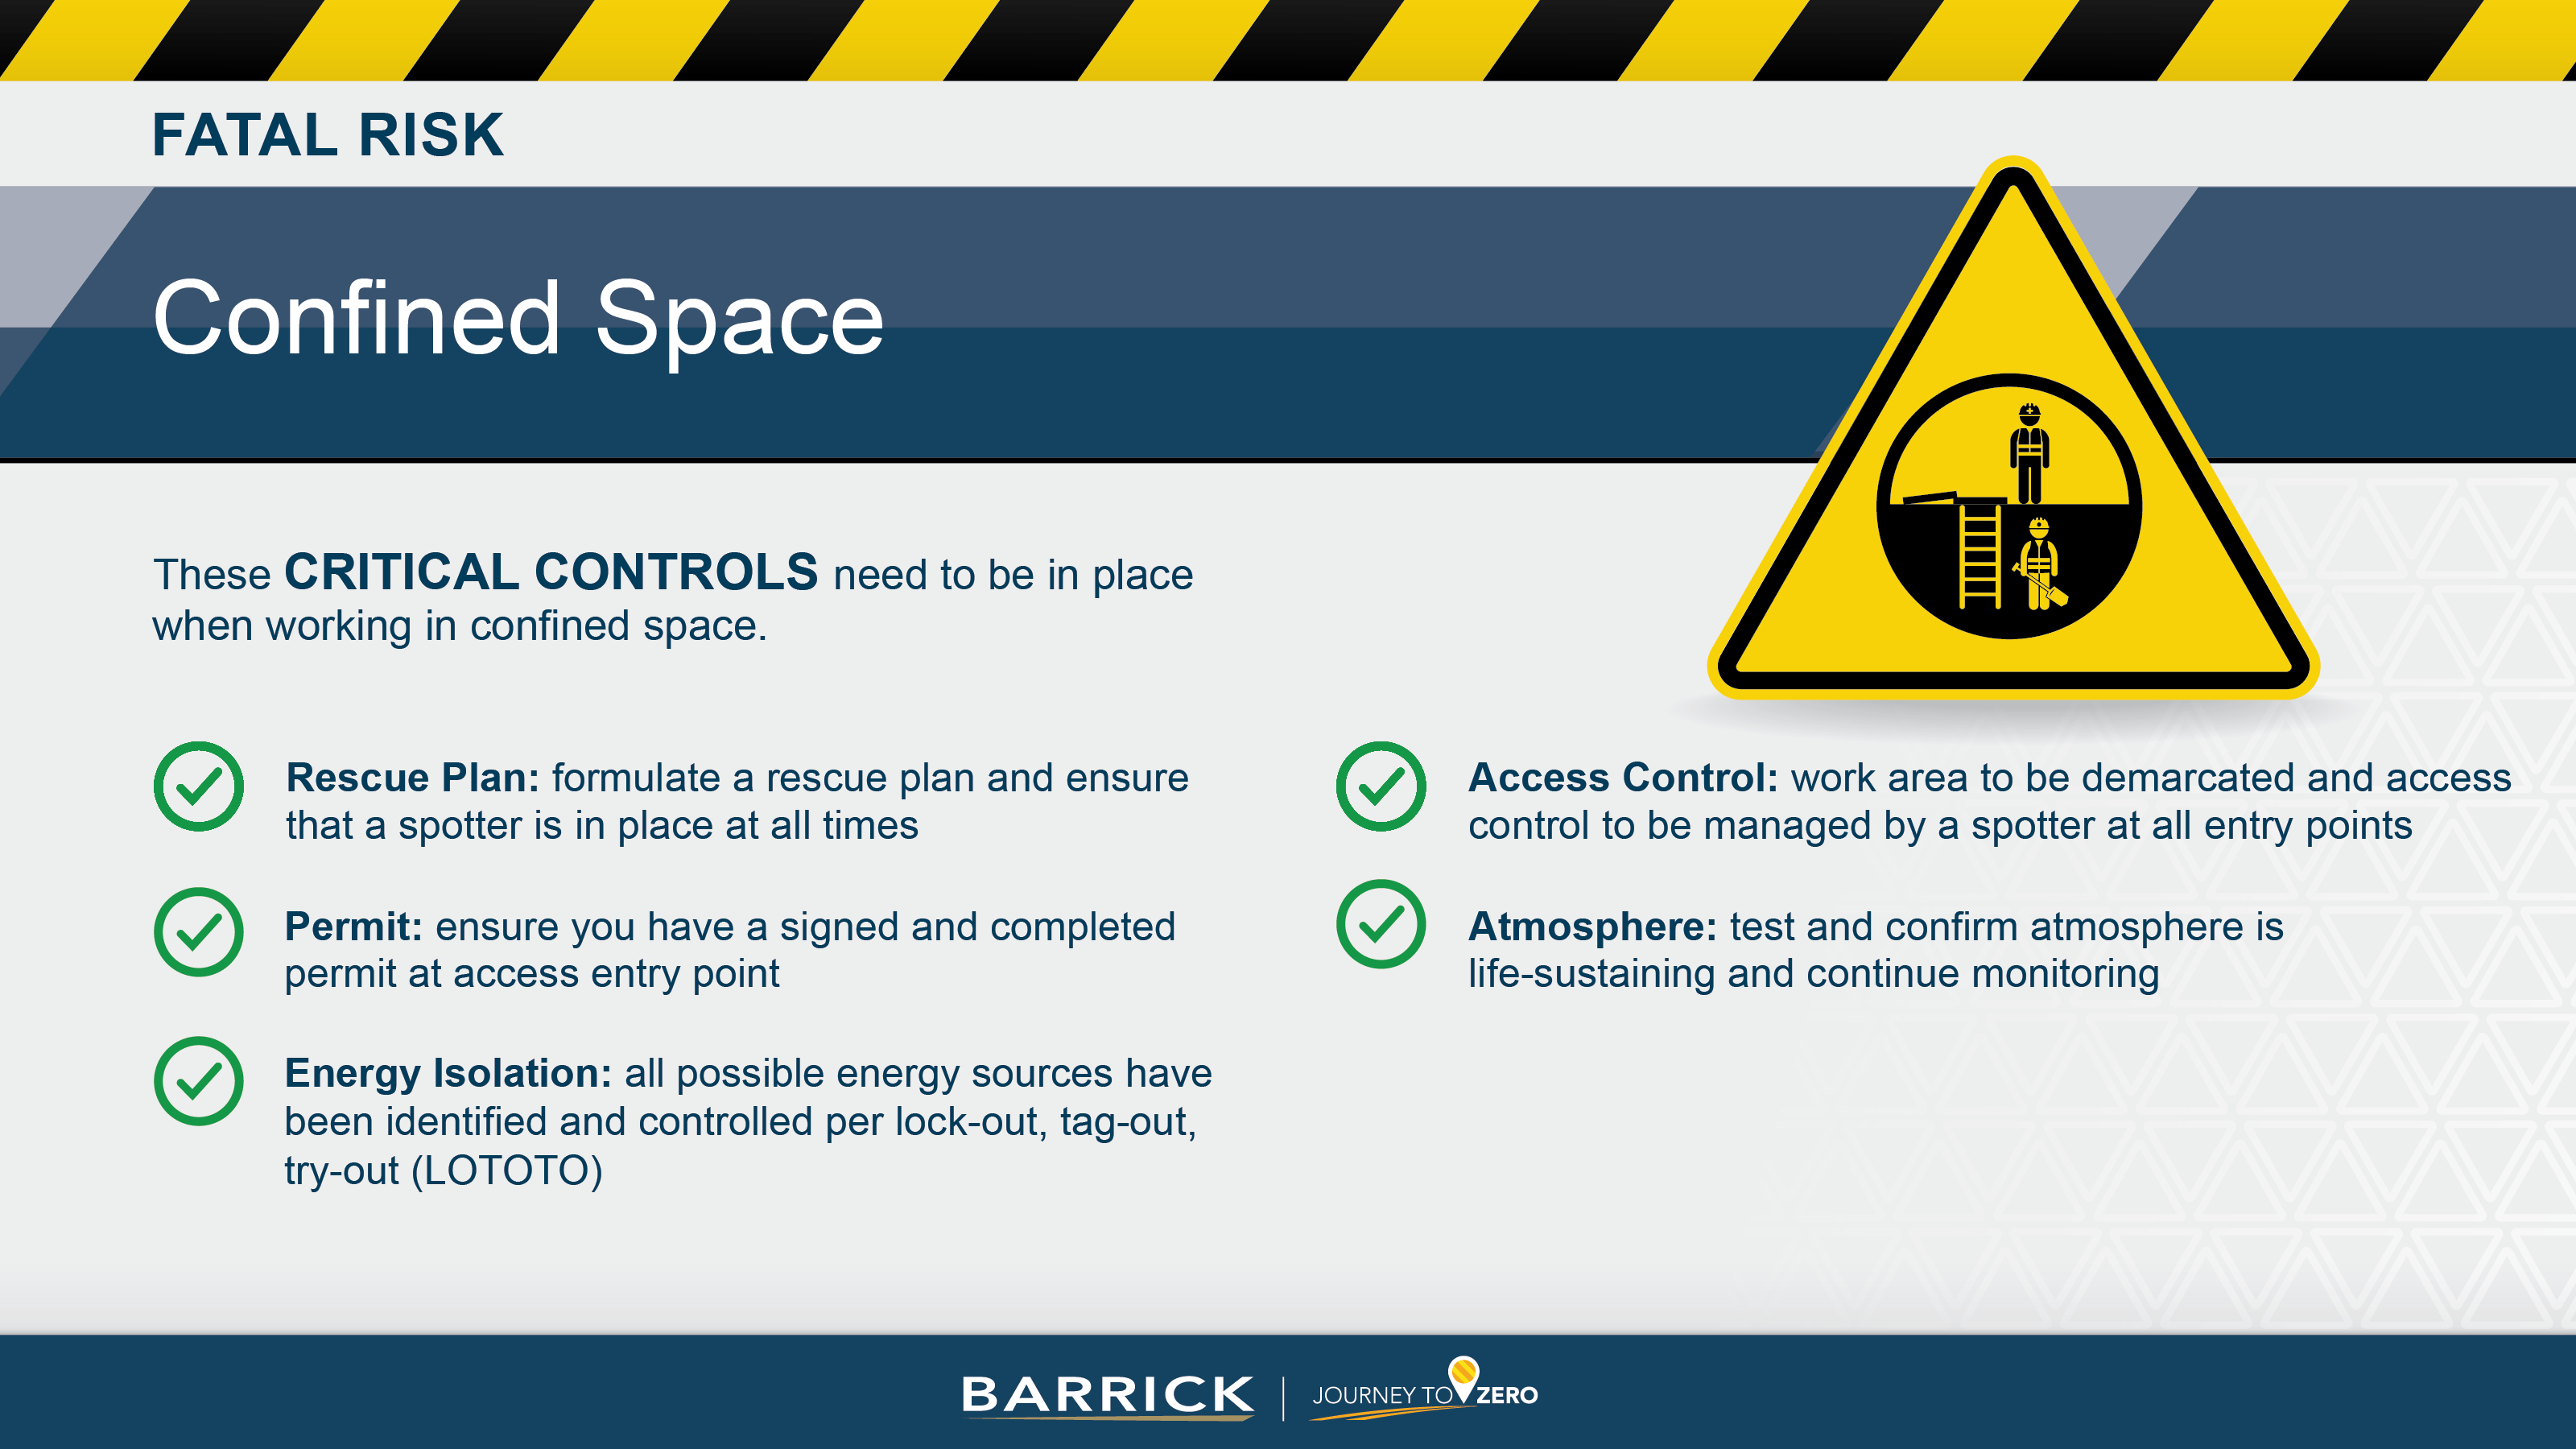 BARRICK_FRI_POSTER_ENGLISH_SCREEN__CONFINED SPACE.png